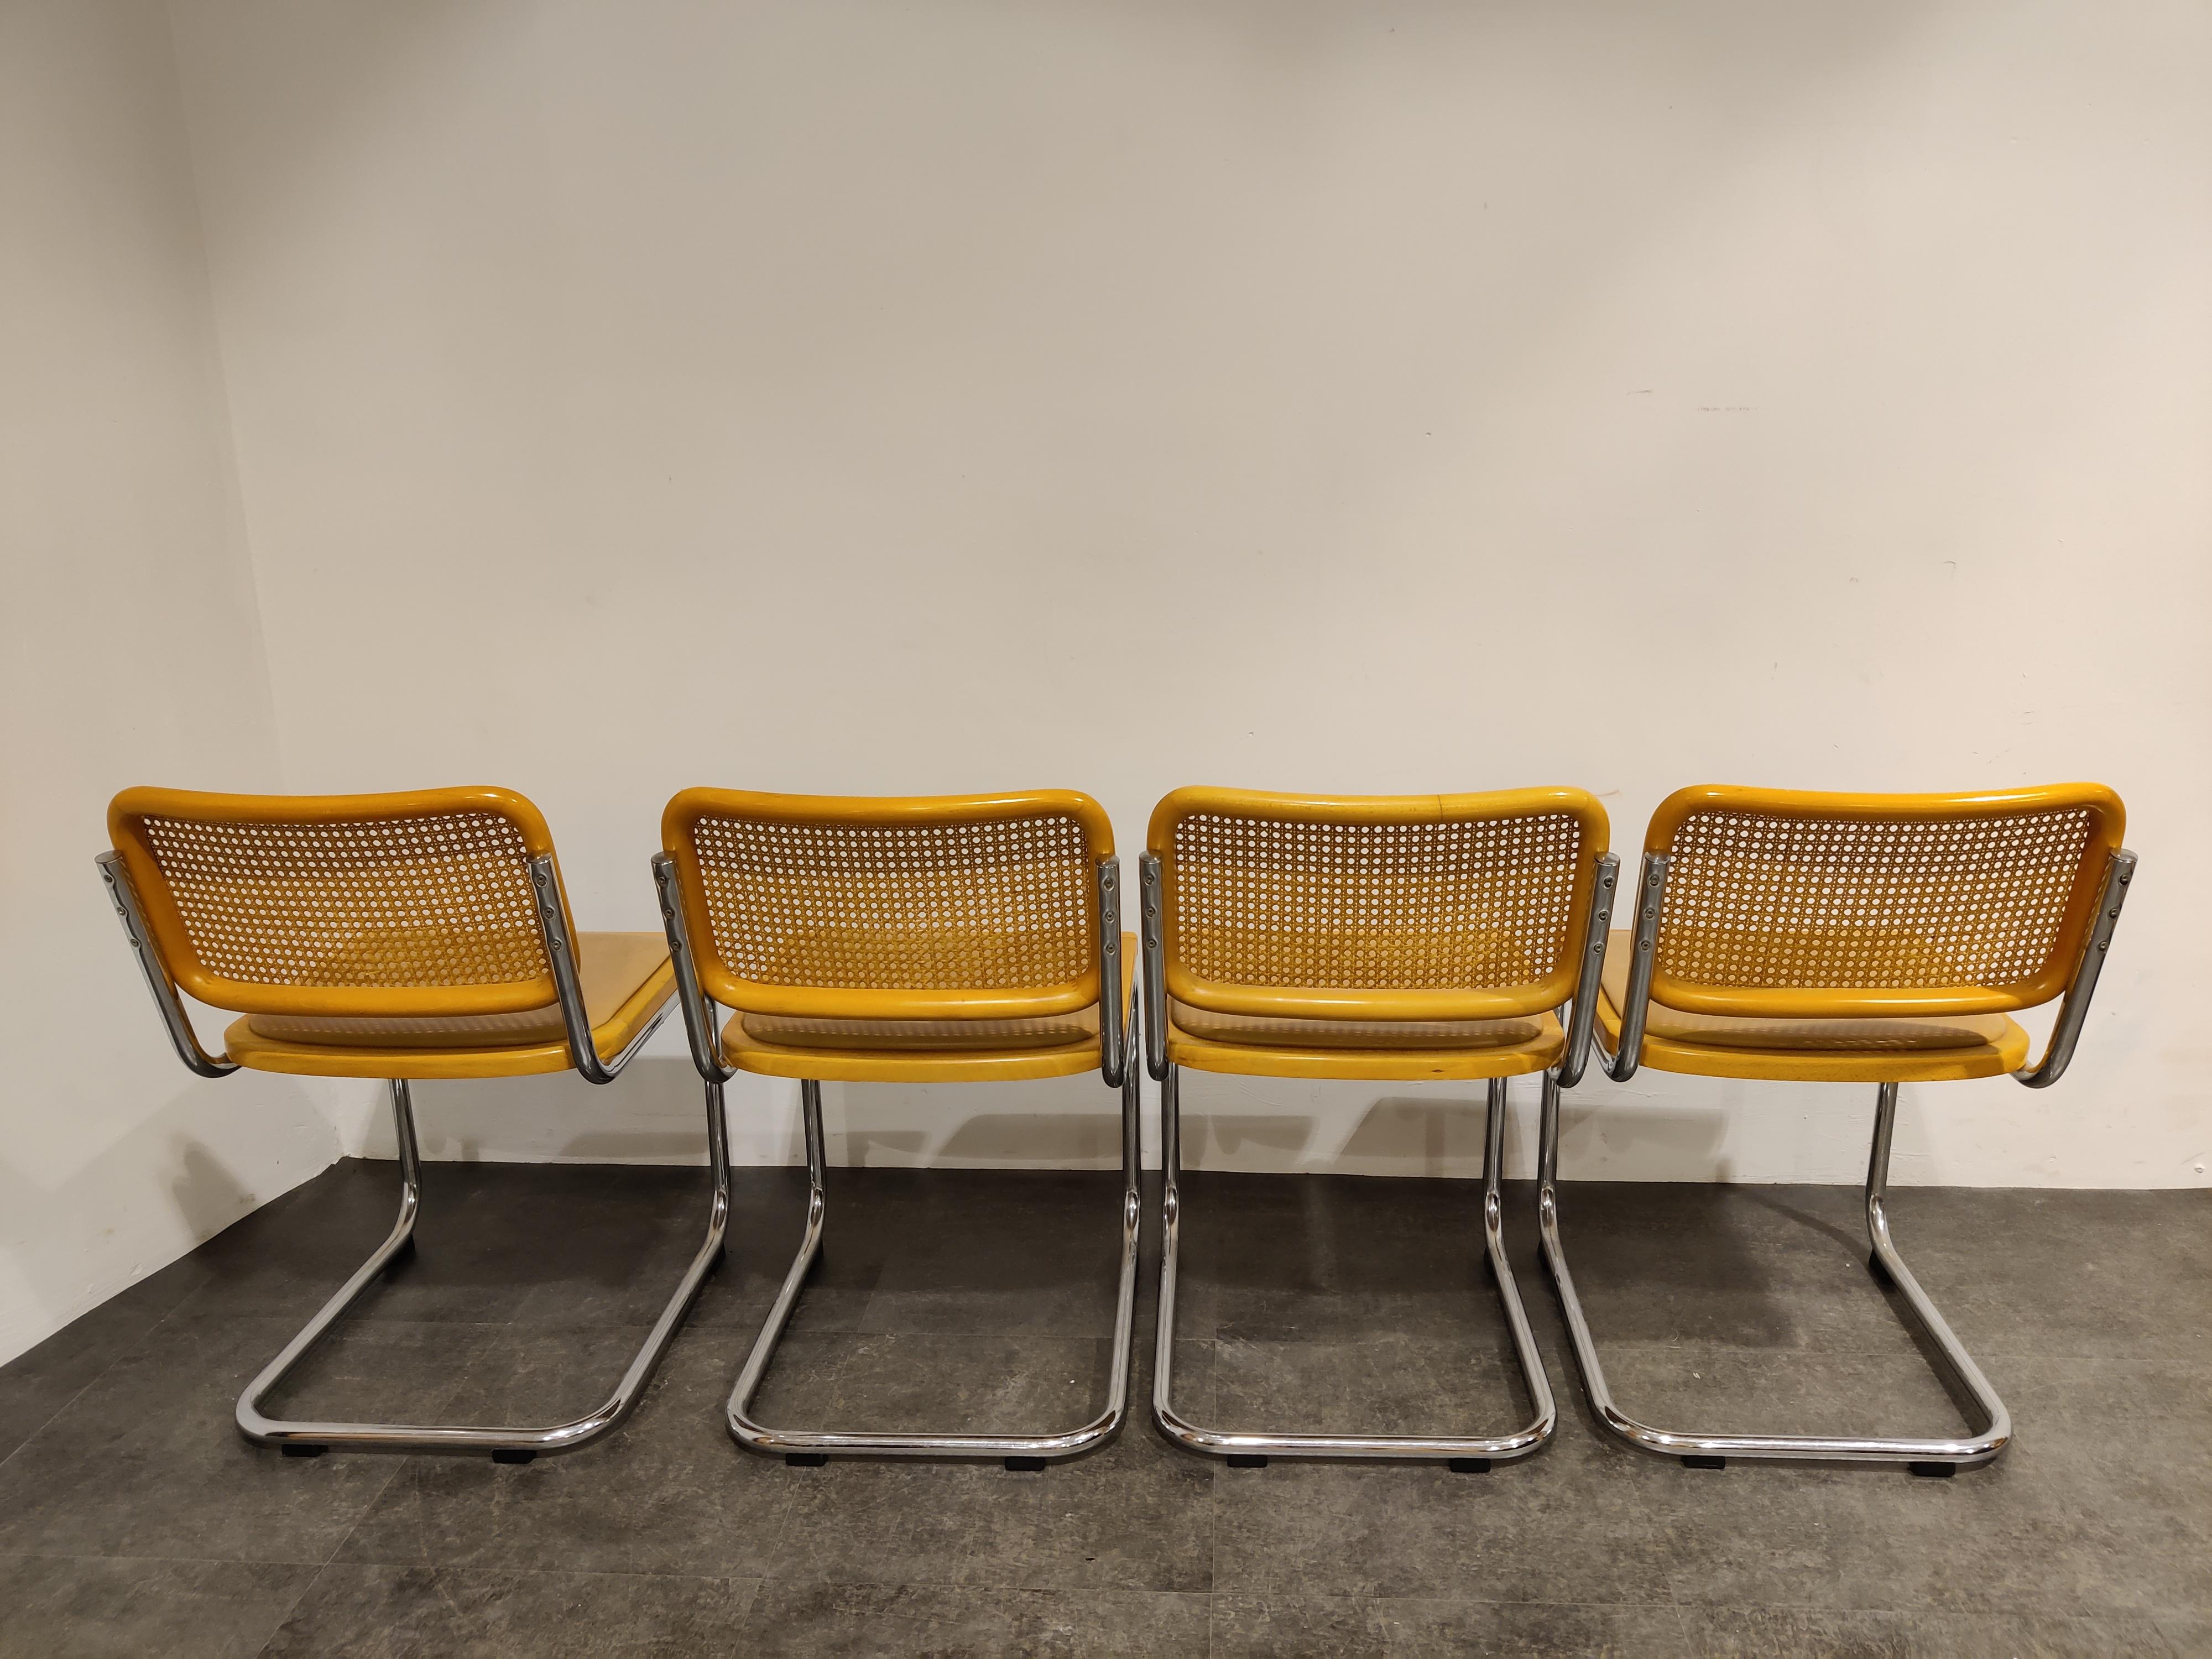 Chrome Vintage Marcel Breuer Cesca Style Chairs Set of 8, Made in Italy, 1970s